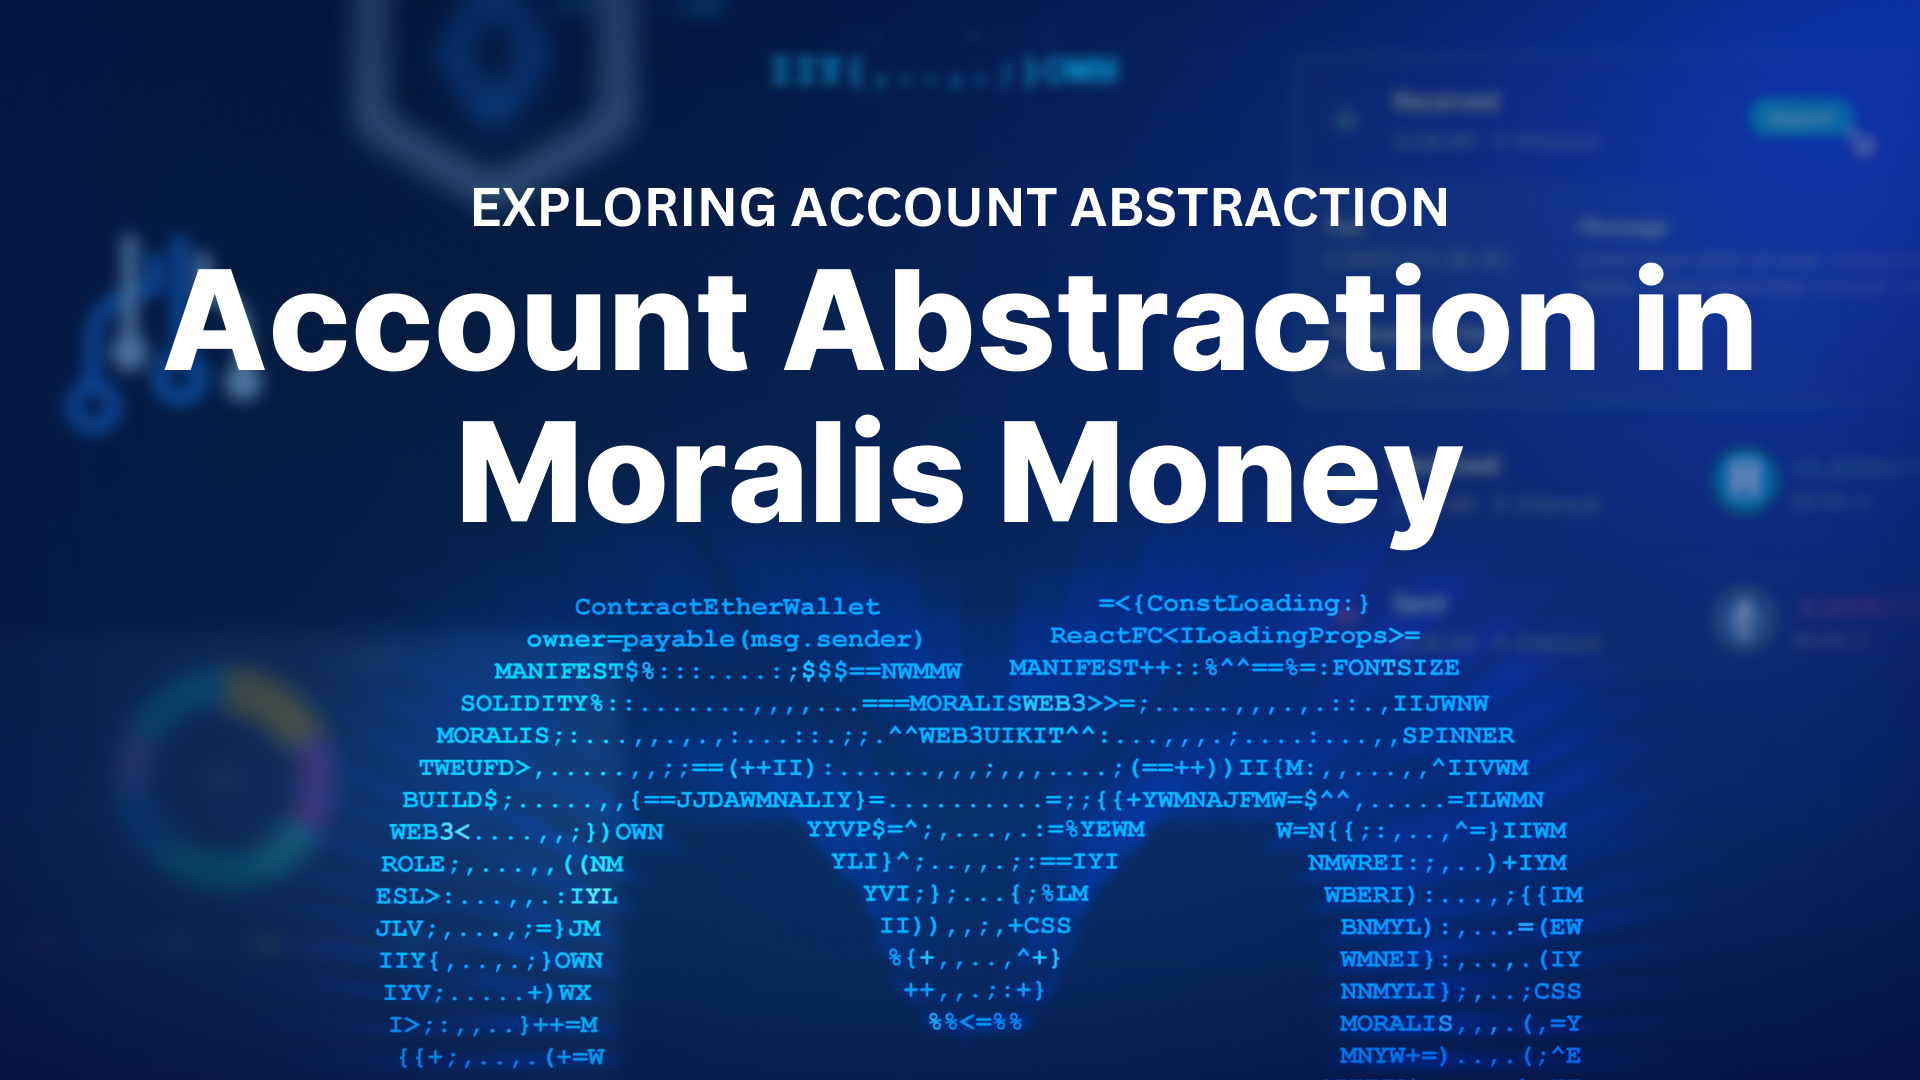 Account abstraction in Moralis Money